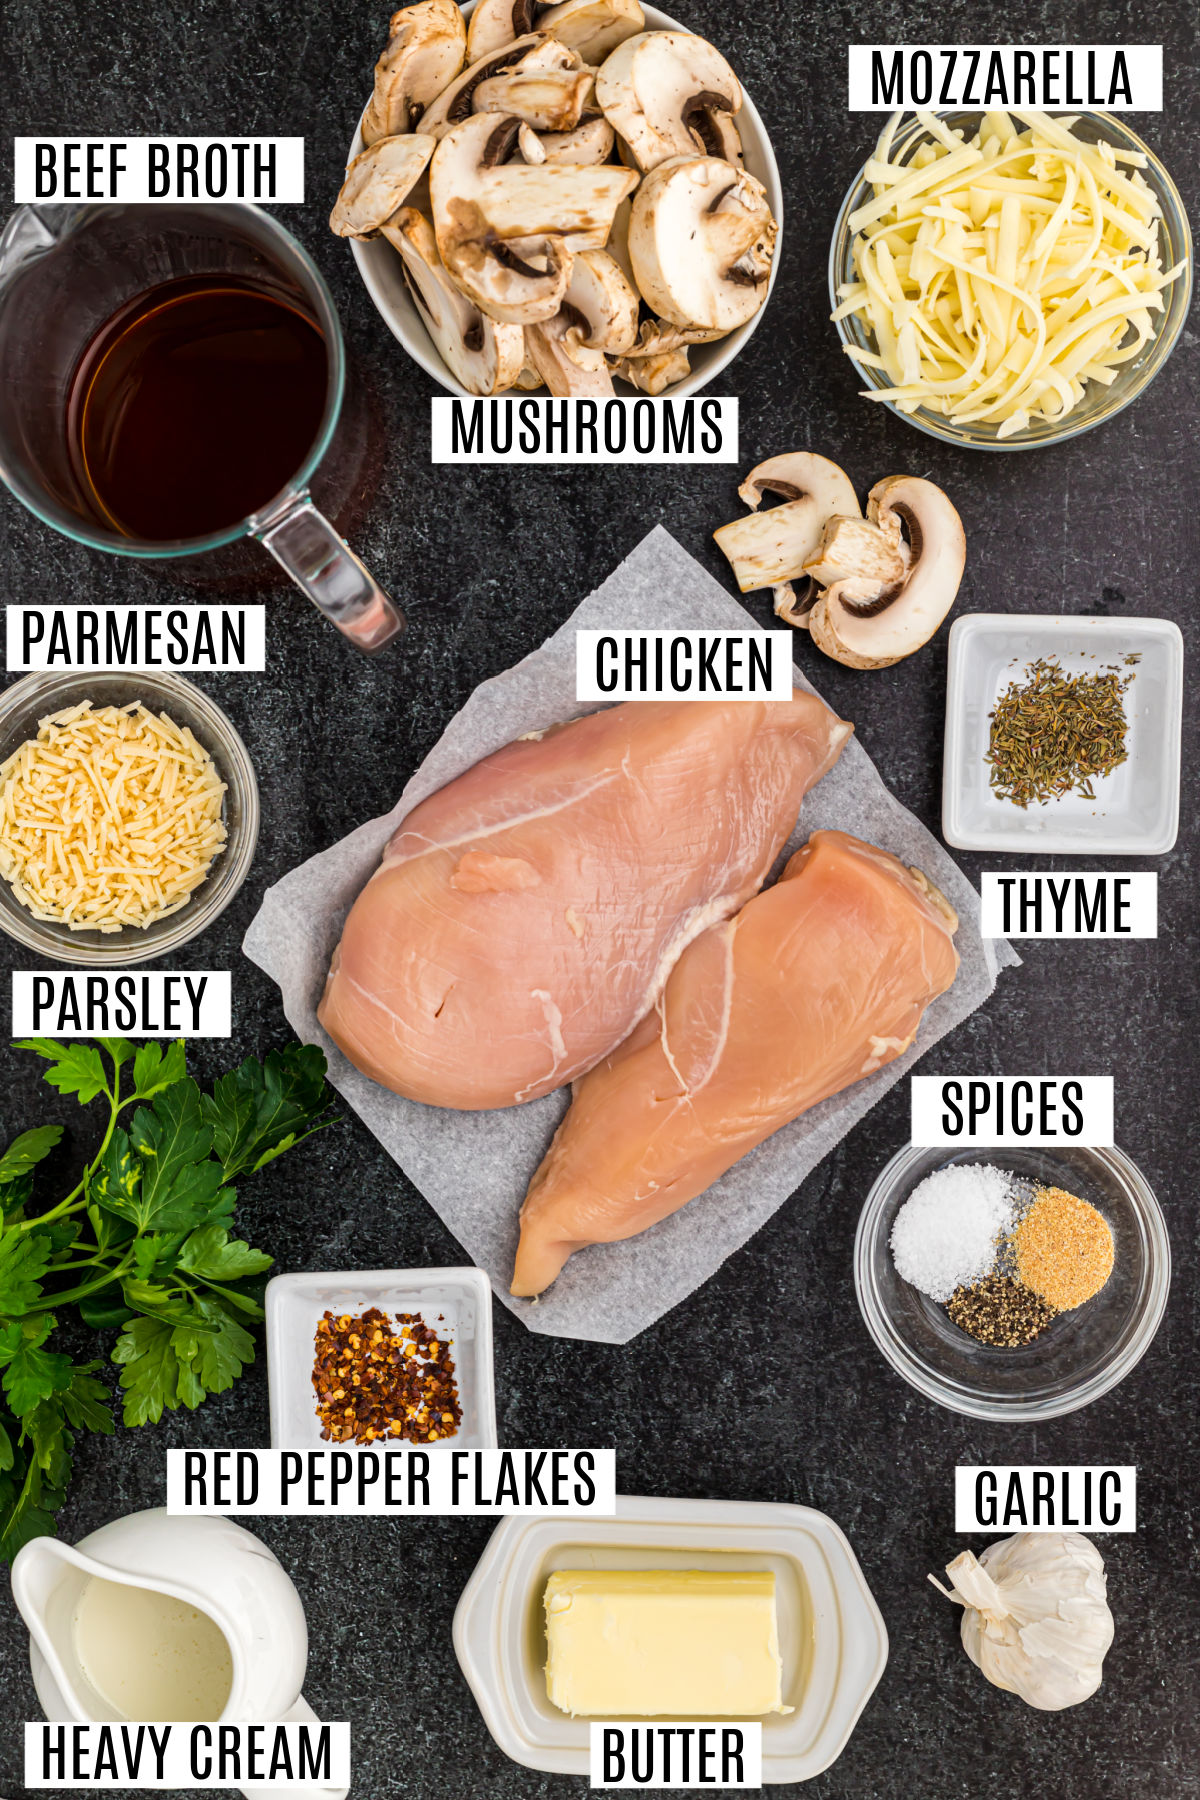 Ingredients needed to make chicken and mushrooms.